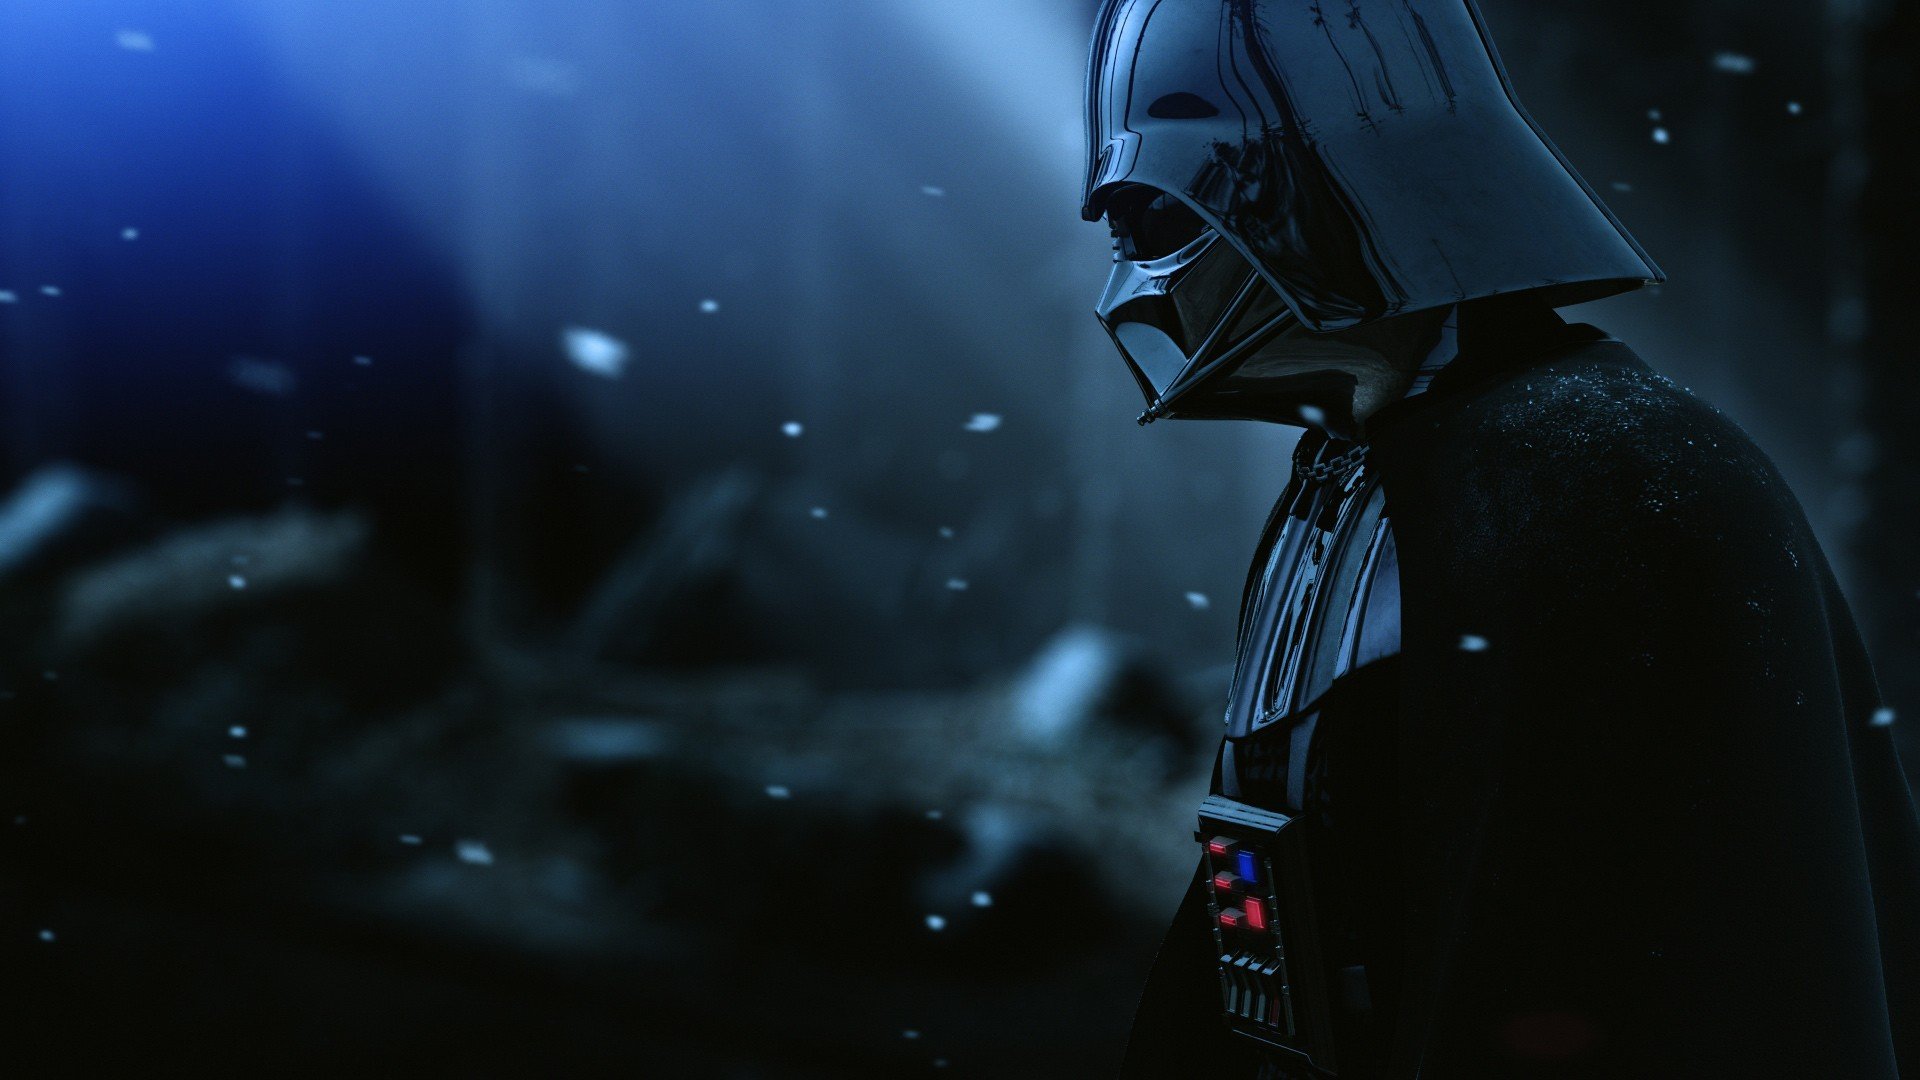 FizX Entertainment Huge Star Wars Wallpapers Collection 1920x1080